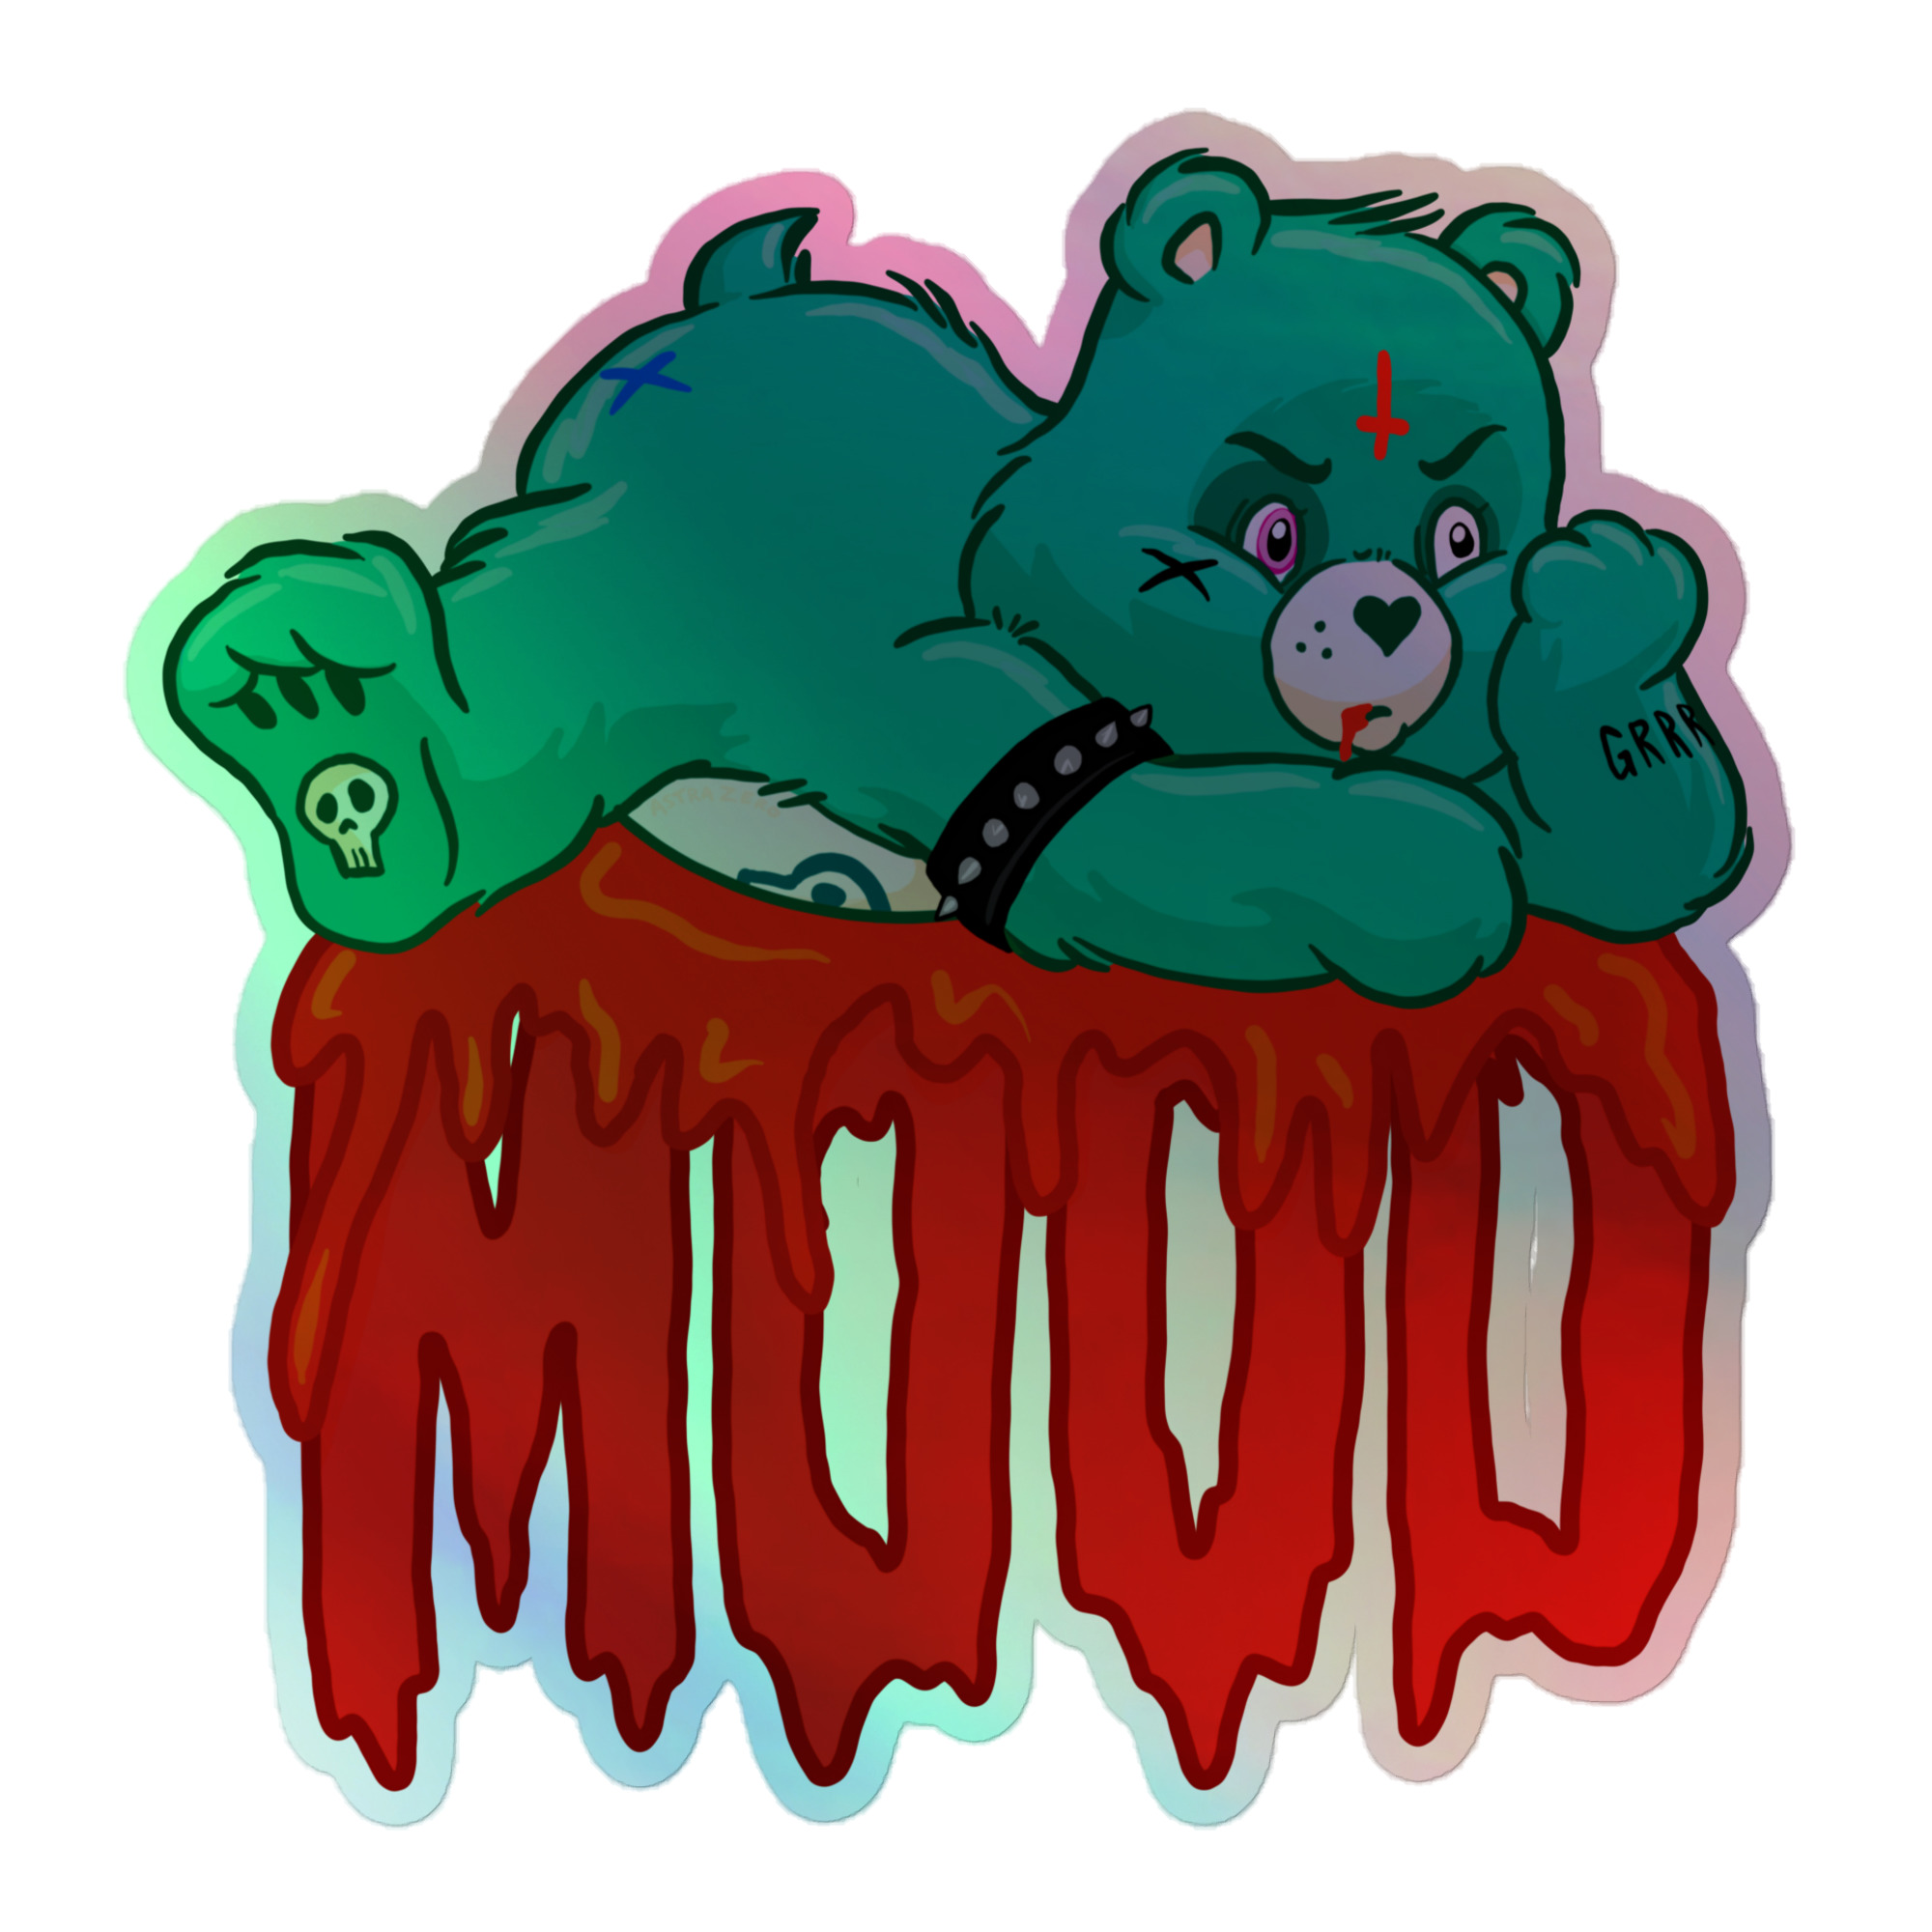 Featured image for “MOOD - Holographic stickers”